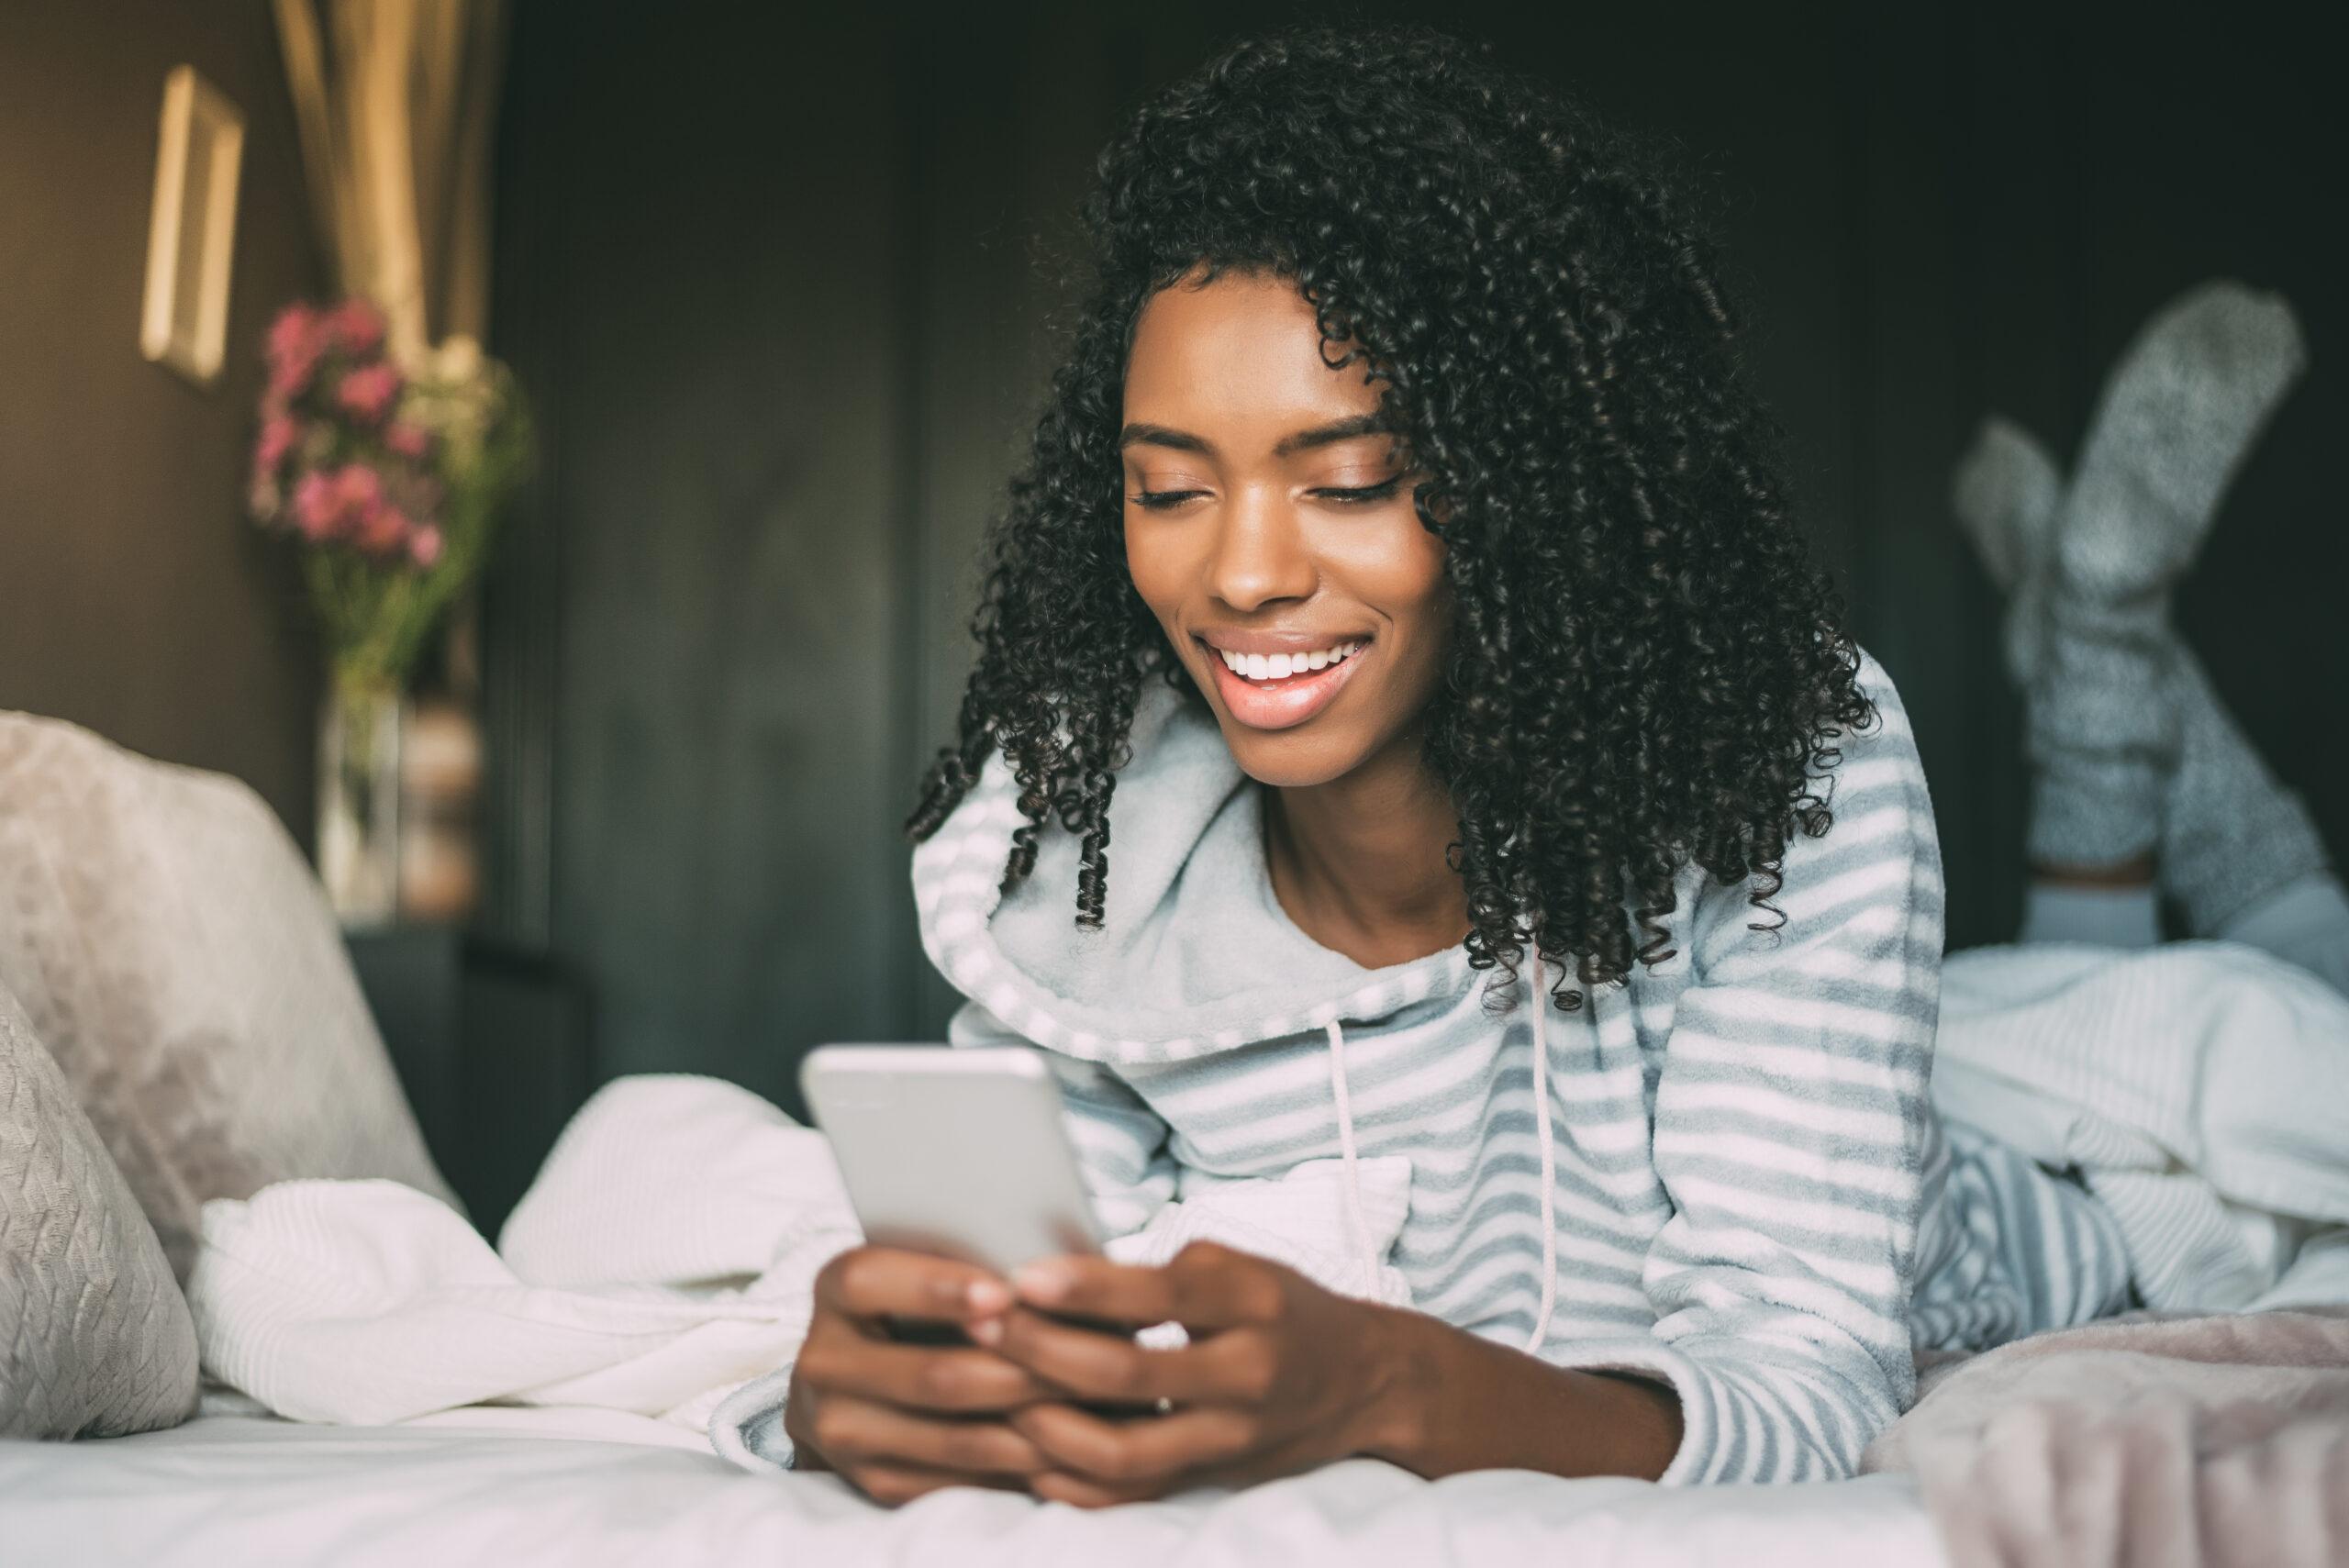 Pretty African-American woman using her smartphone in bed trying to make her Instagram account public